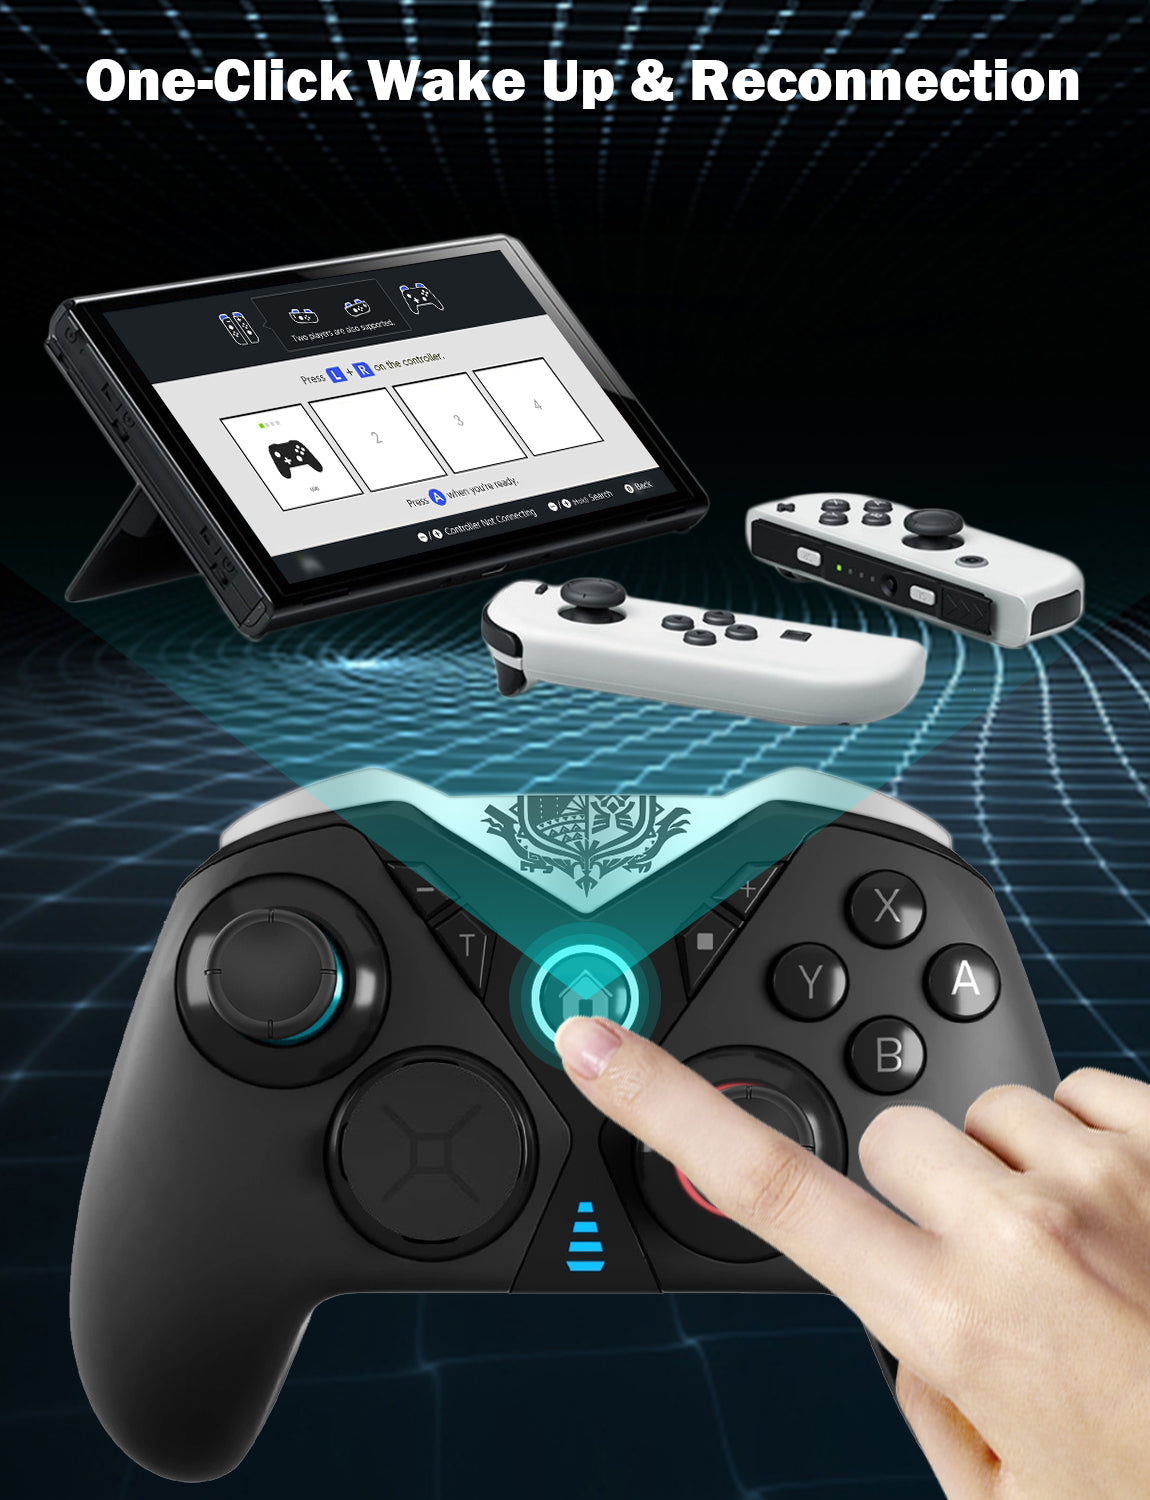 Wake console & auto-reconnect by pressing home button on controller.